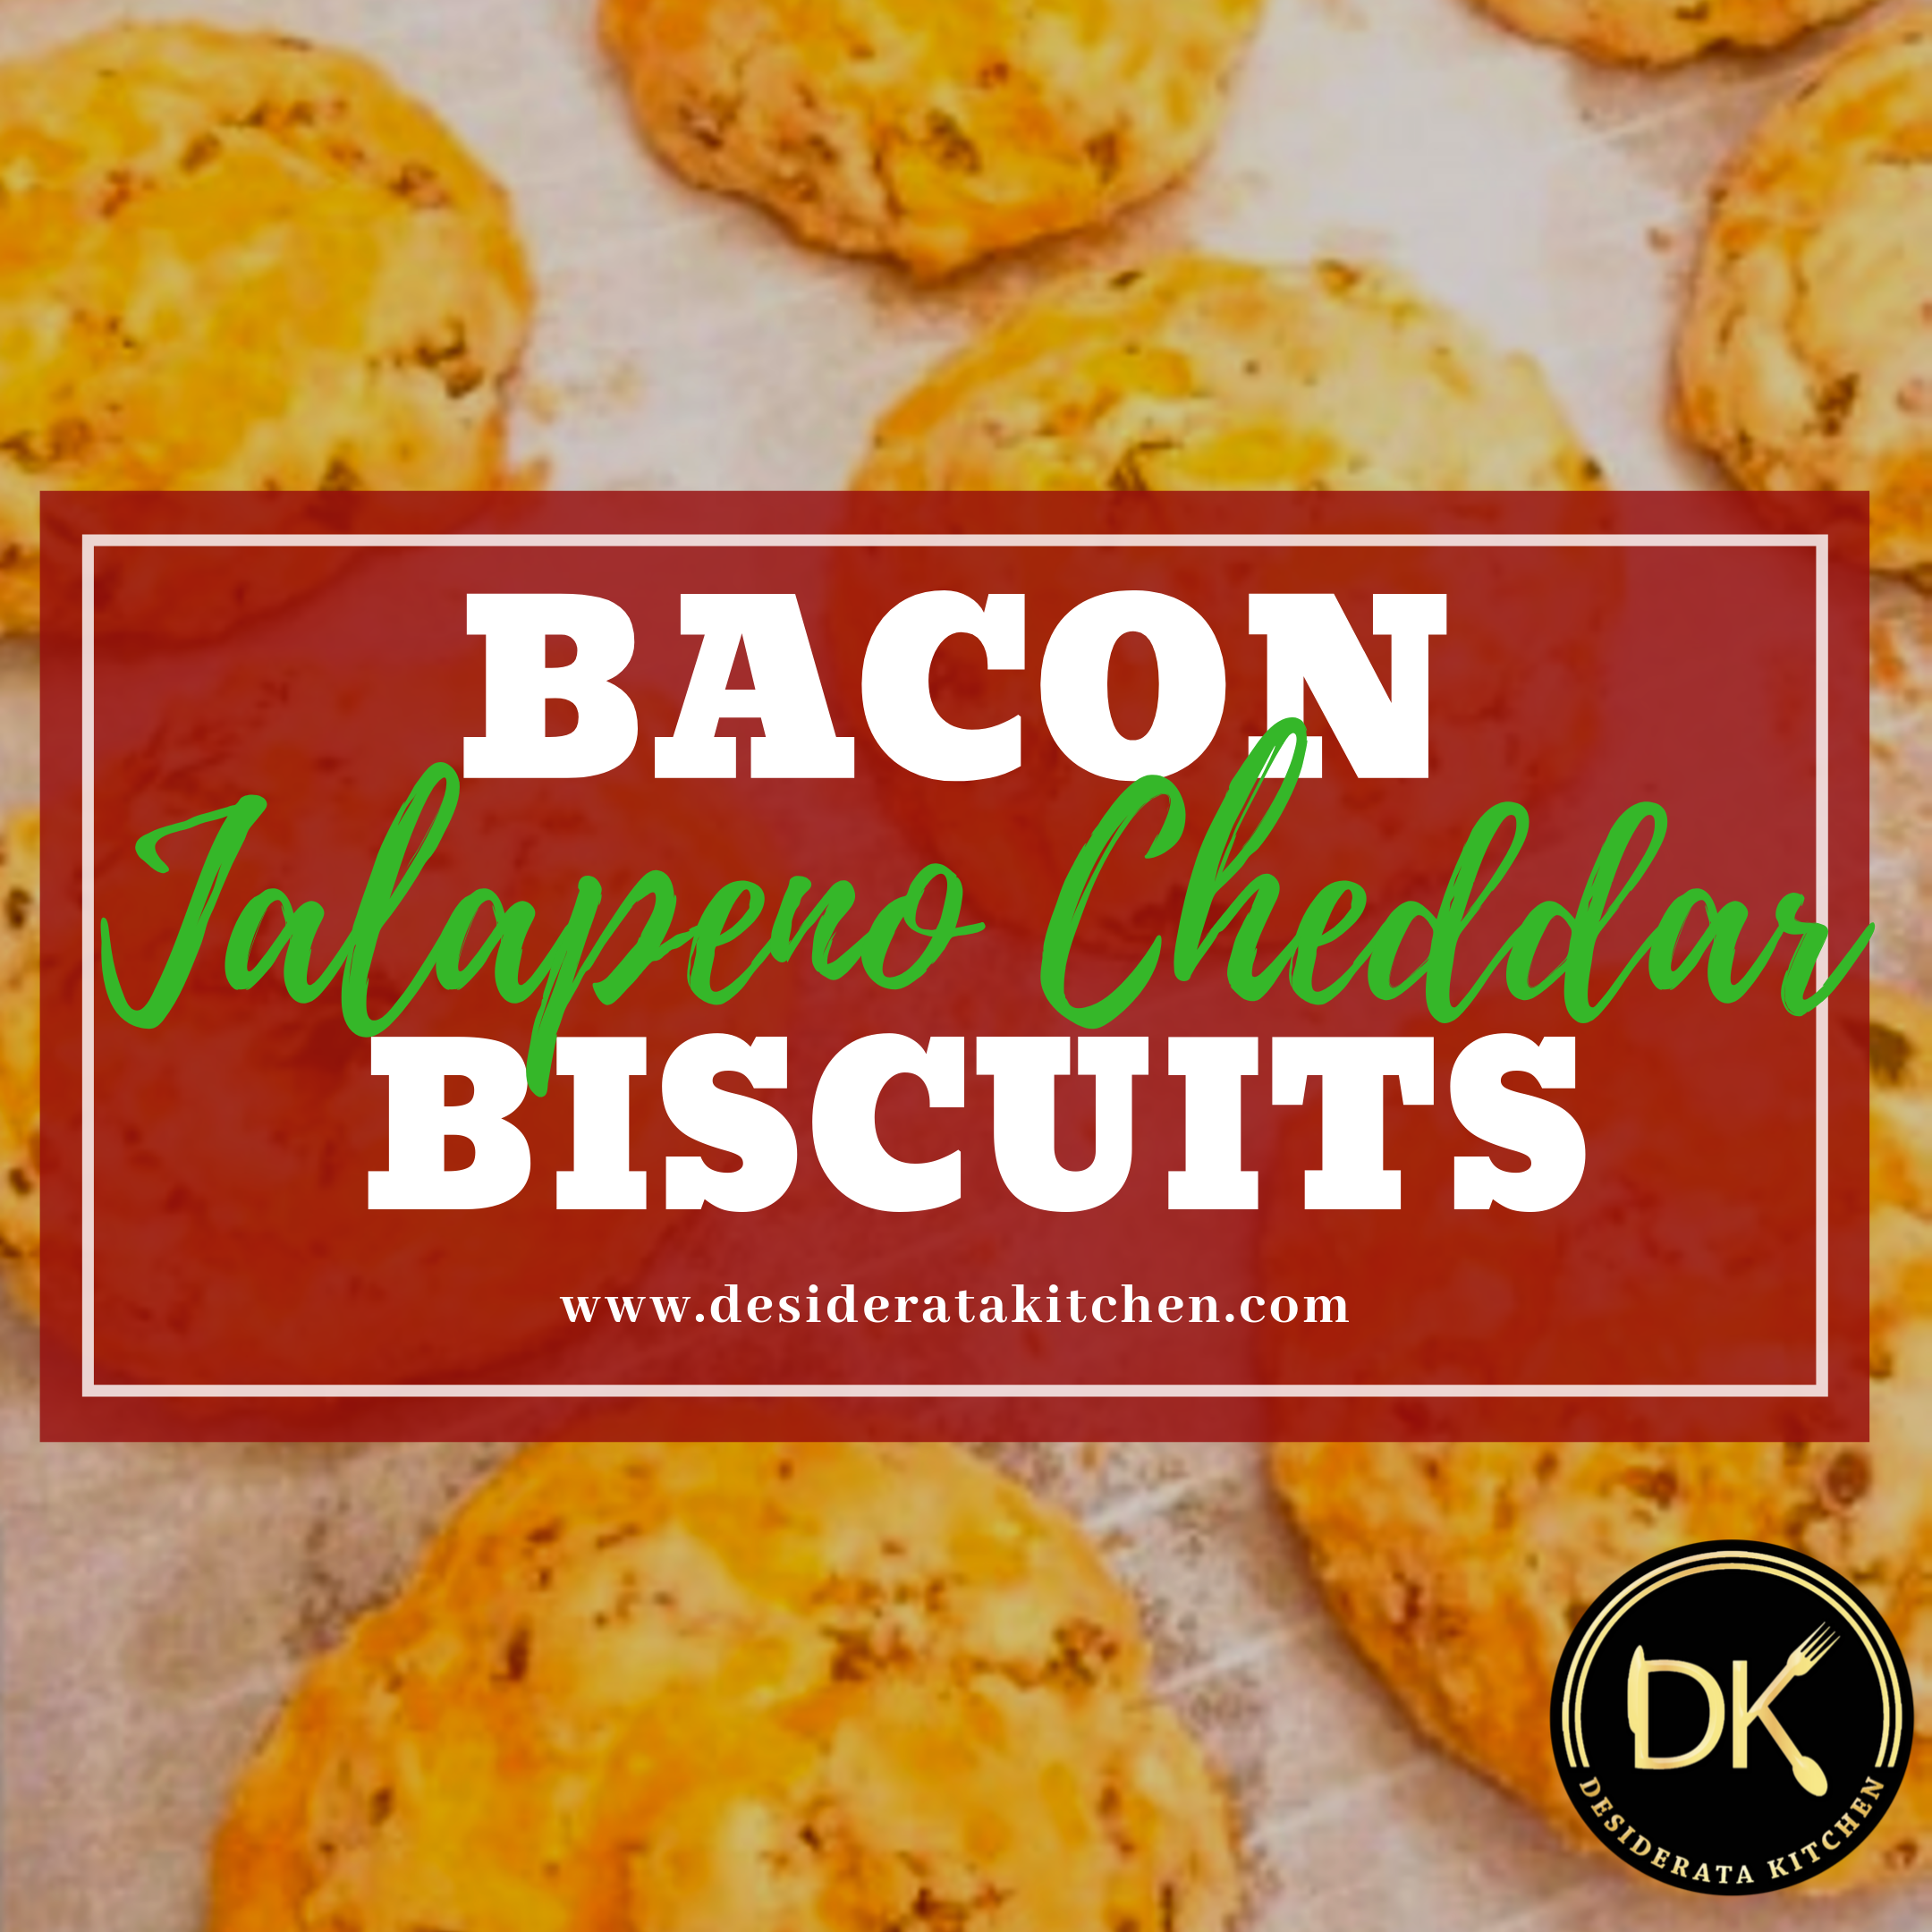 Keteaux Bacon Jalapeno Cheddar Biscuits